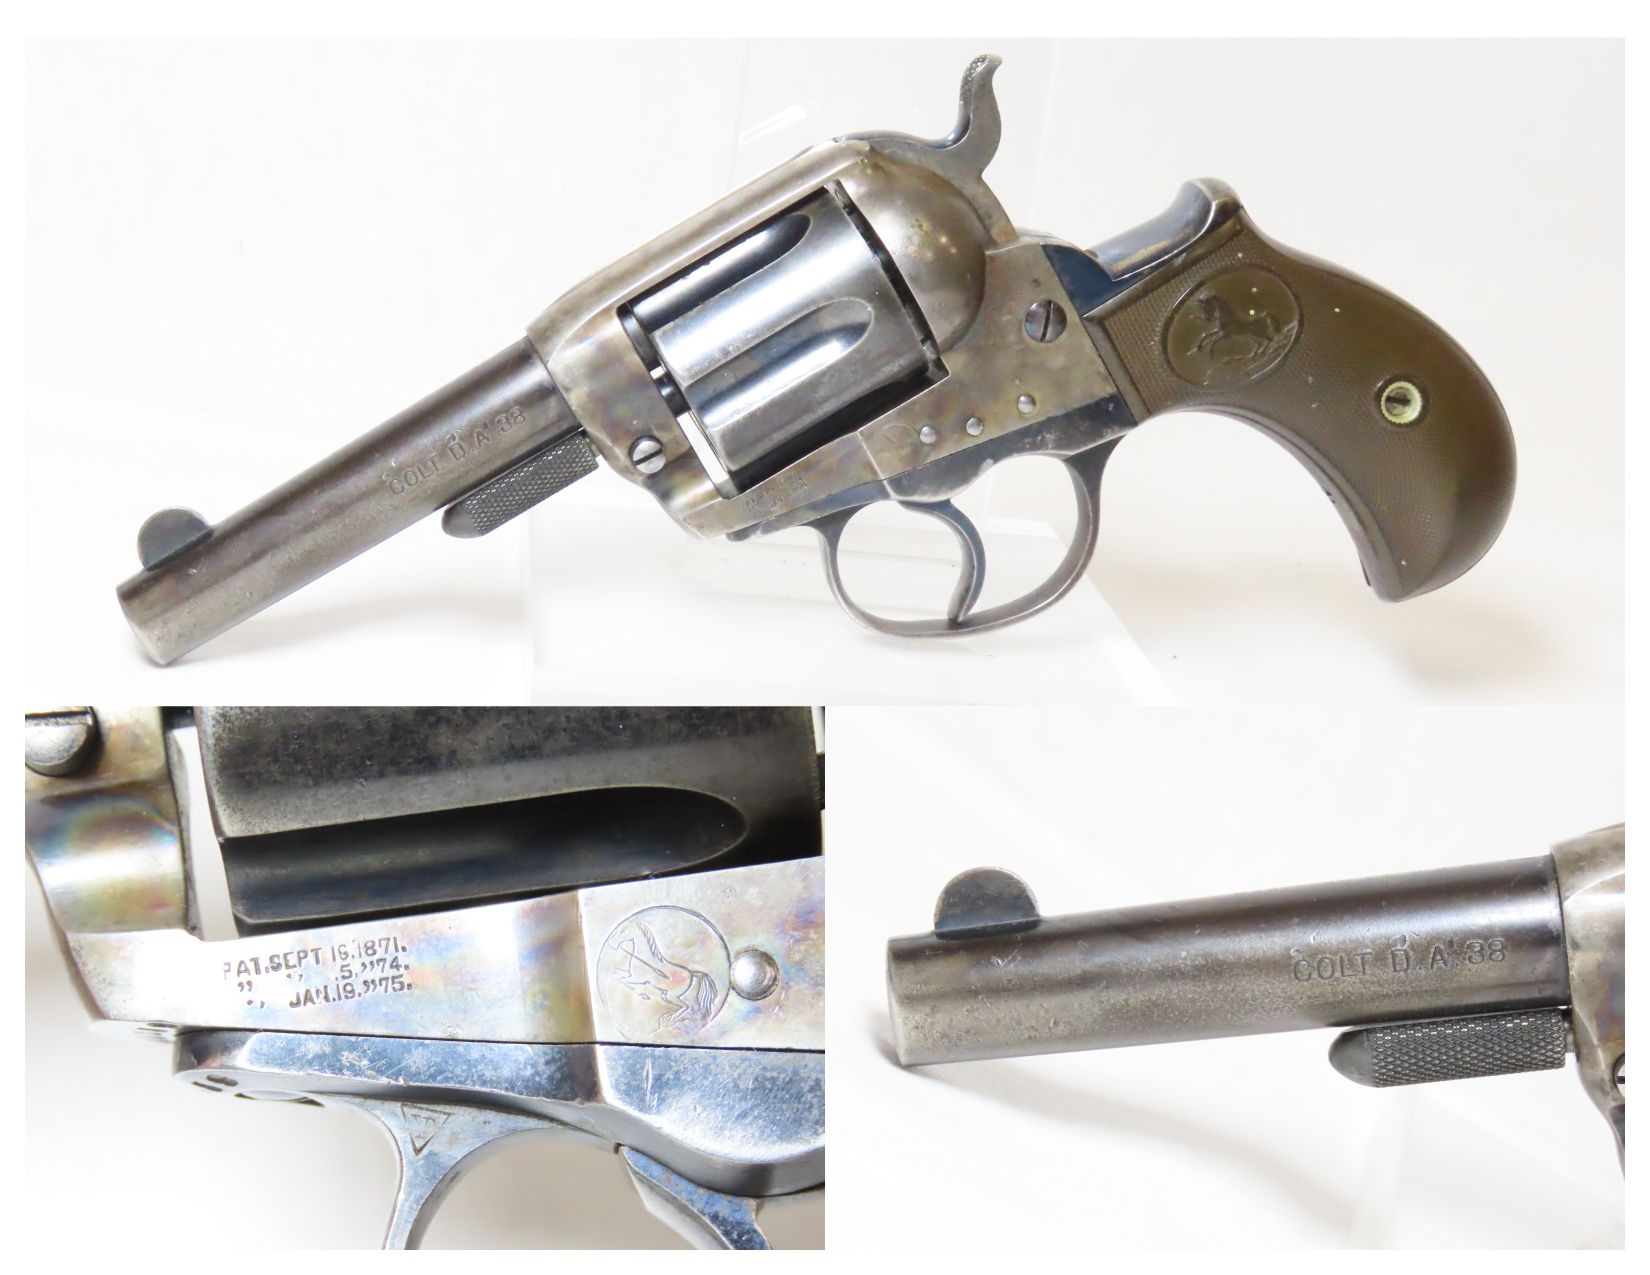 C.1924 Colt Army Special 38 Double Action Revolver sold at auction on 29th  July